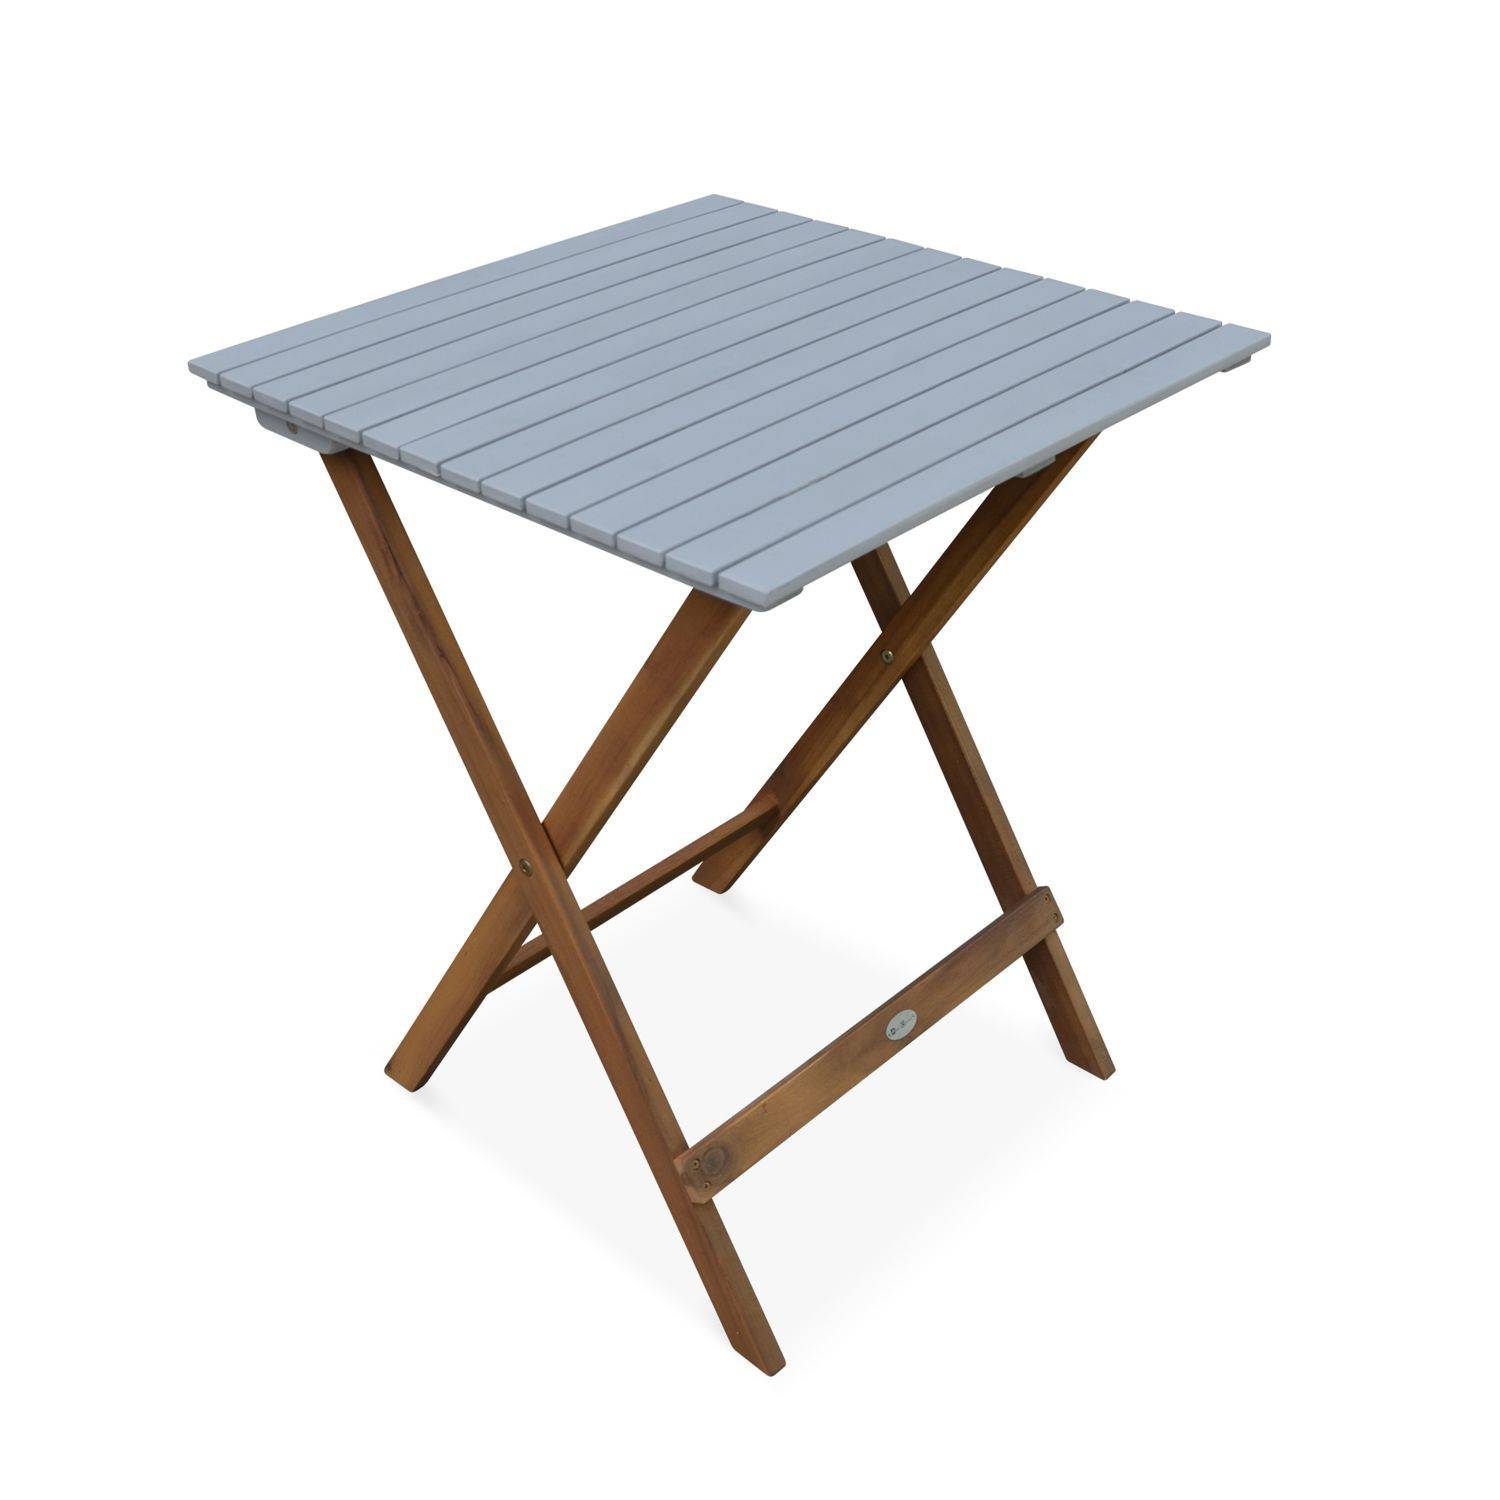 2-seater foldable wooden bistro garden table with chairs, 60x60cm - Barcelona - Light Grey Photo3